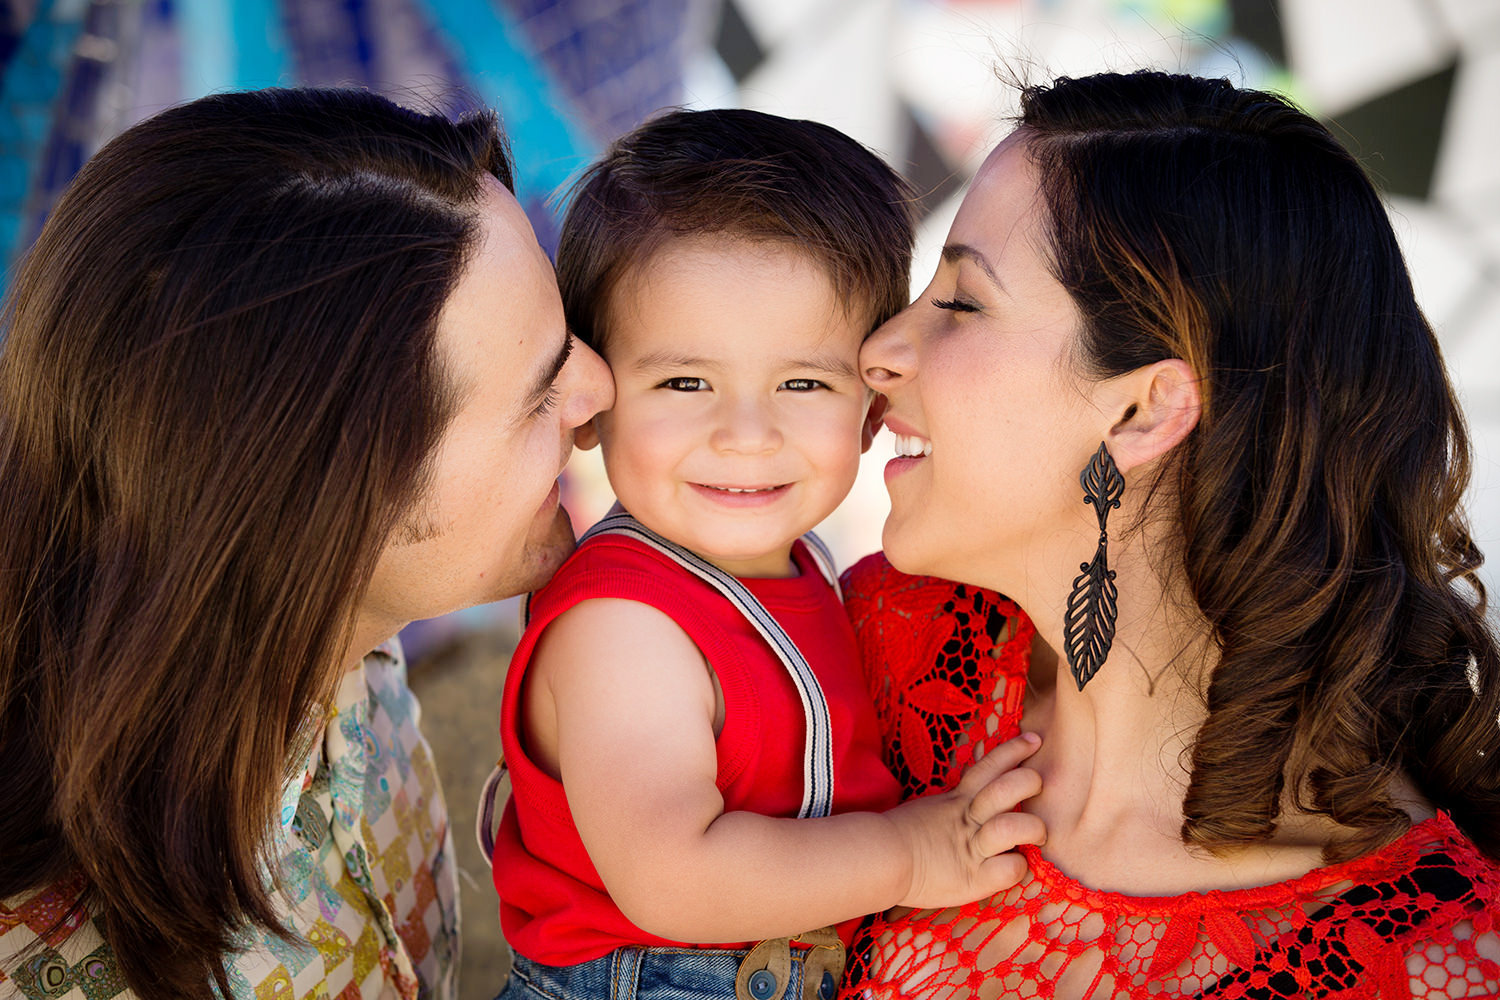 san diego family photographer | parents laughing at son wearing red